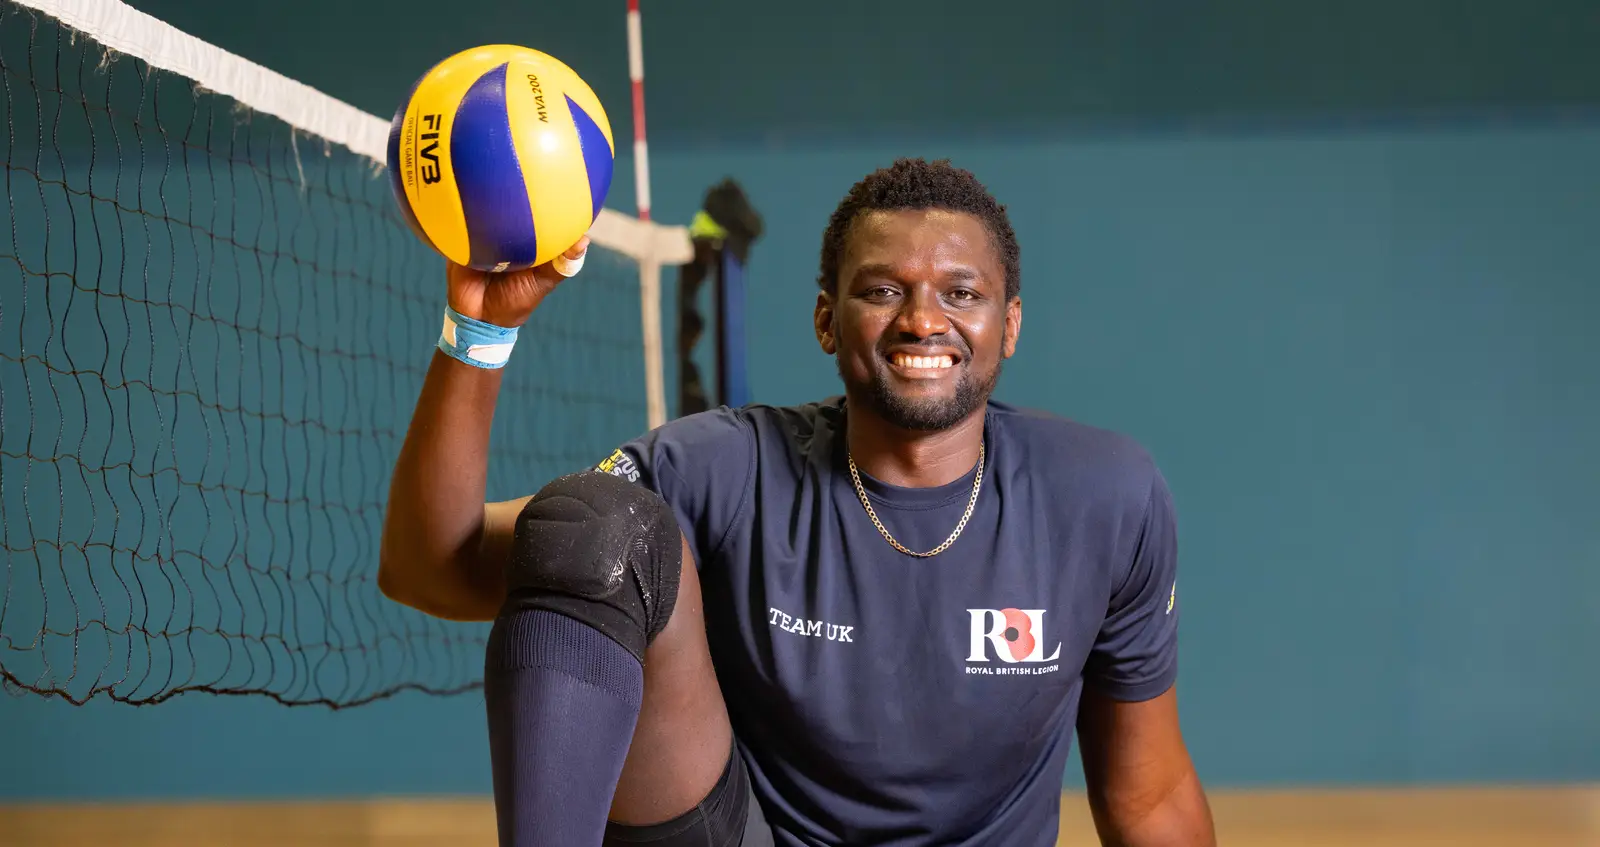 Emmanuel in his navy Invictus Games Team UK kit. He is sat on a volleyball court holding a volleyball up in the air in one of his hands. He is smiling.